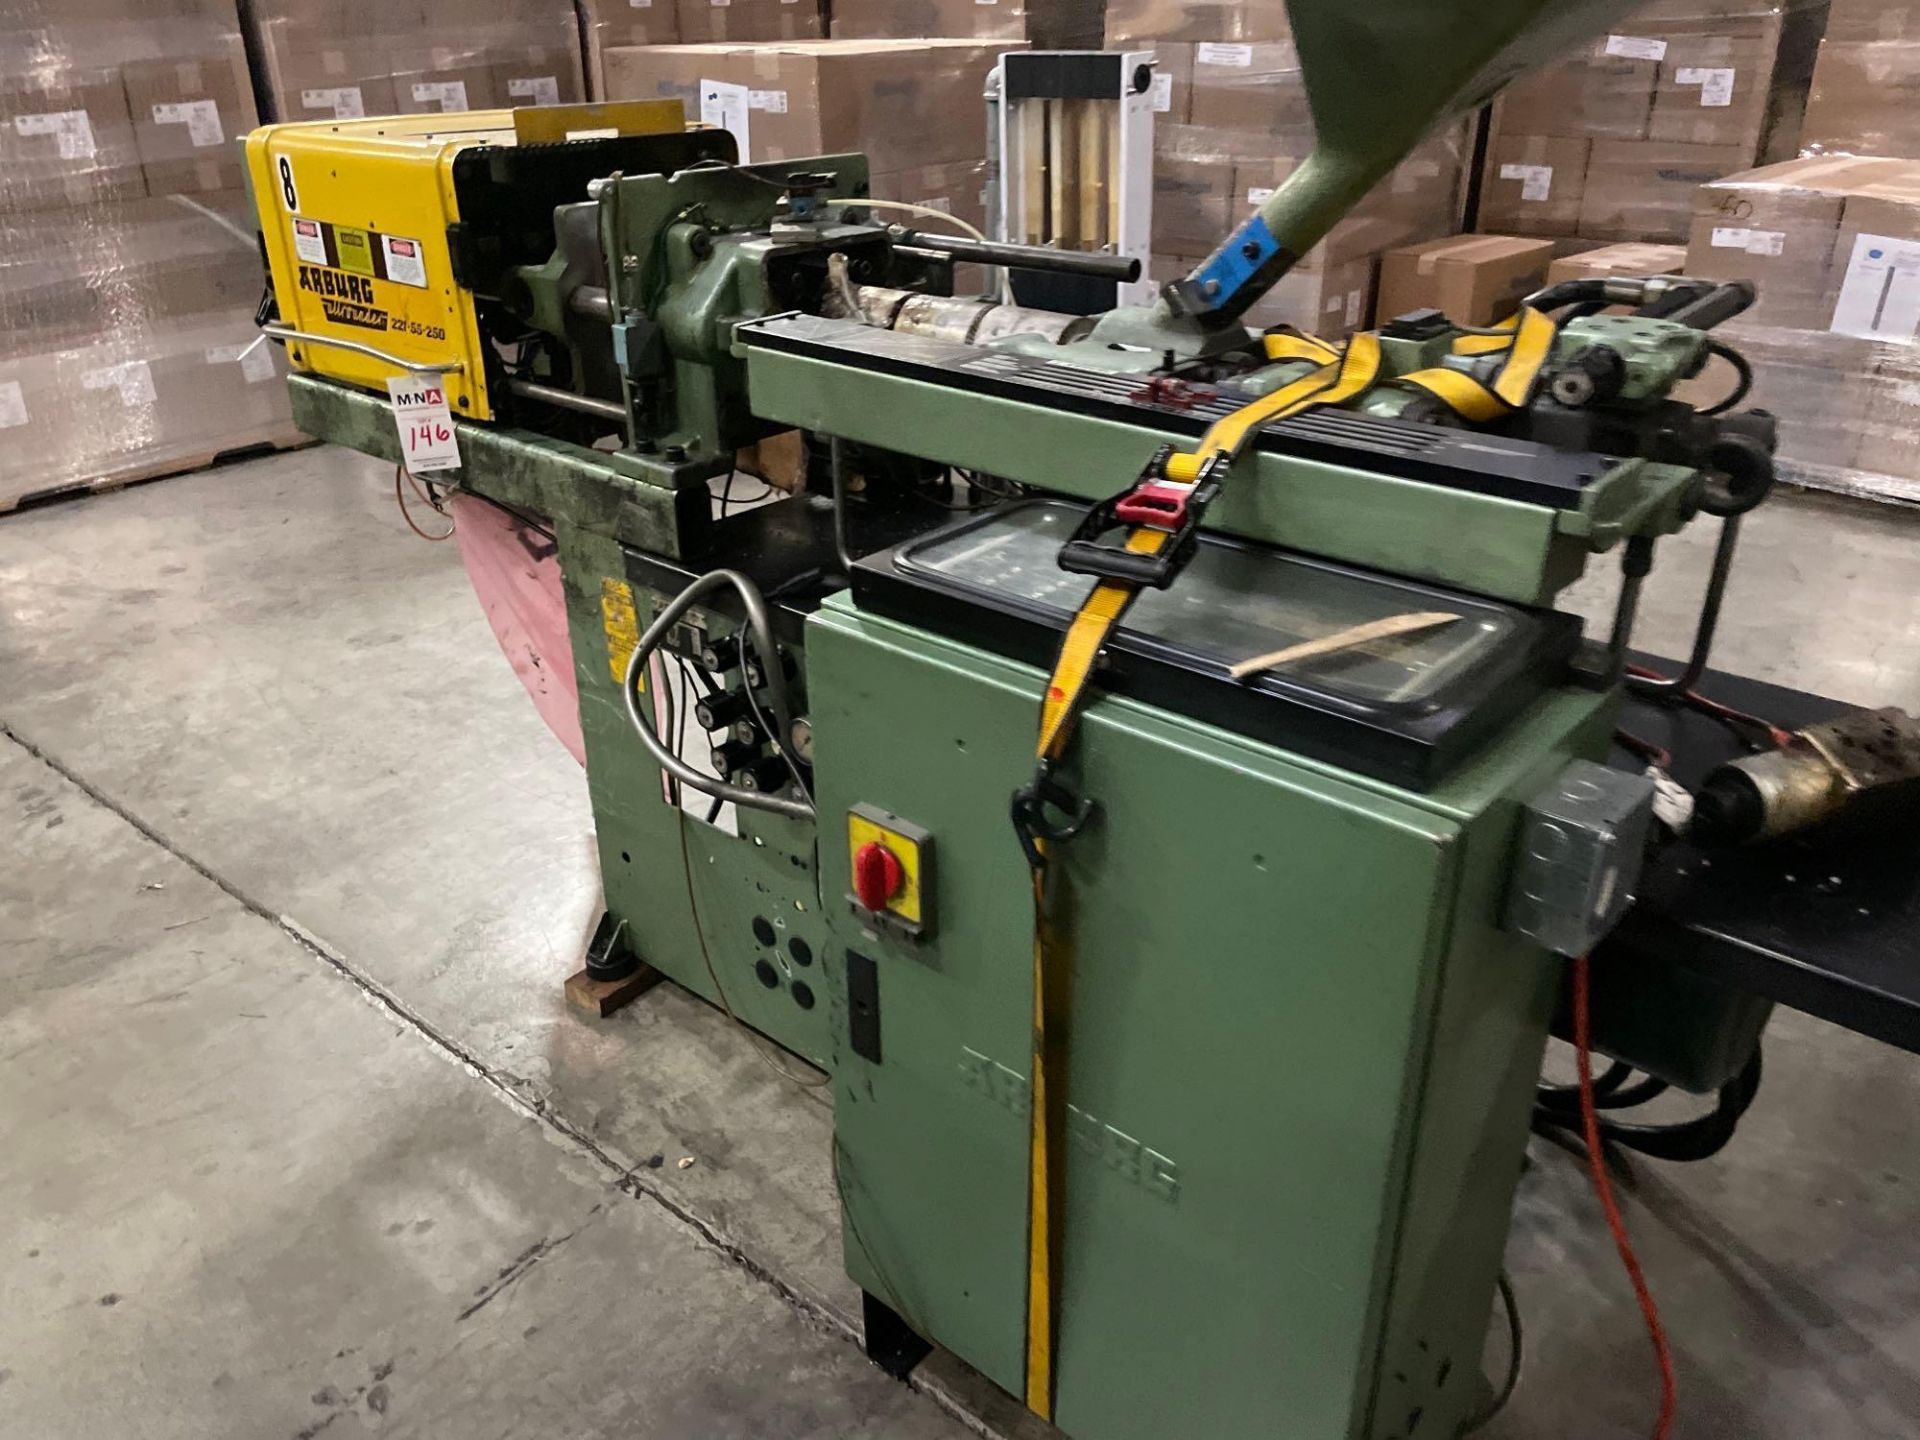 Arburg Allrounder 221-55-250 Plastic Injection Molding Machine *PARTS ONLY* - Image 2 of 5